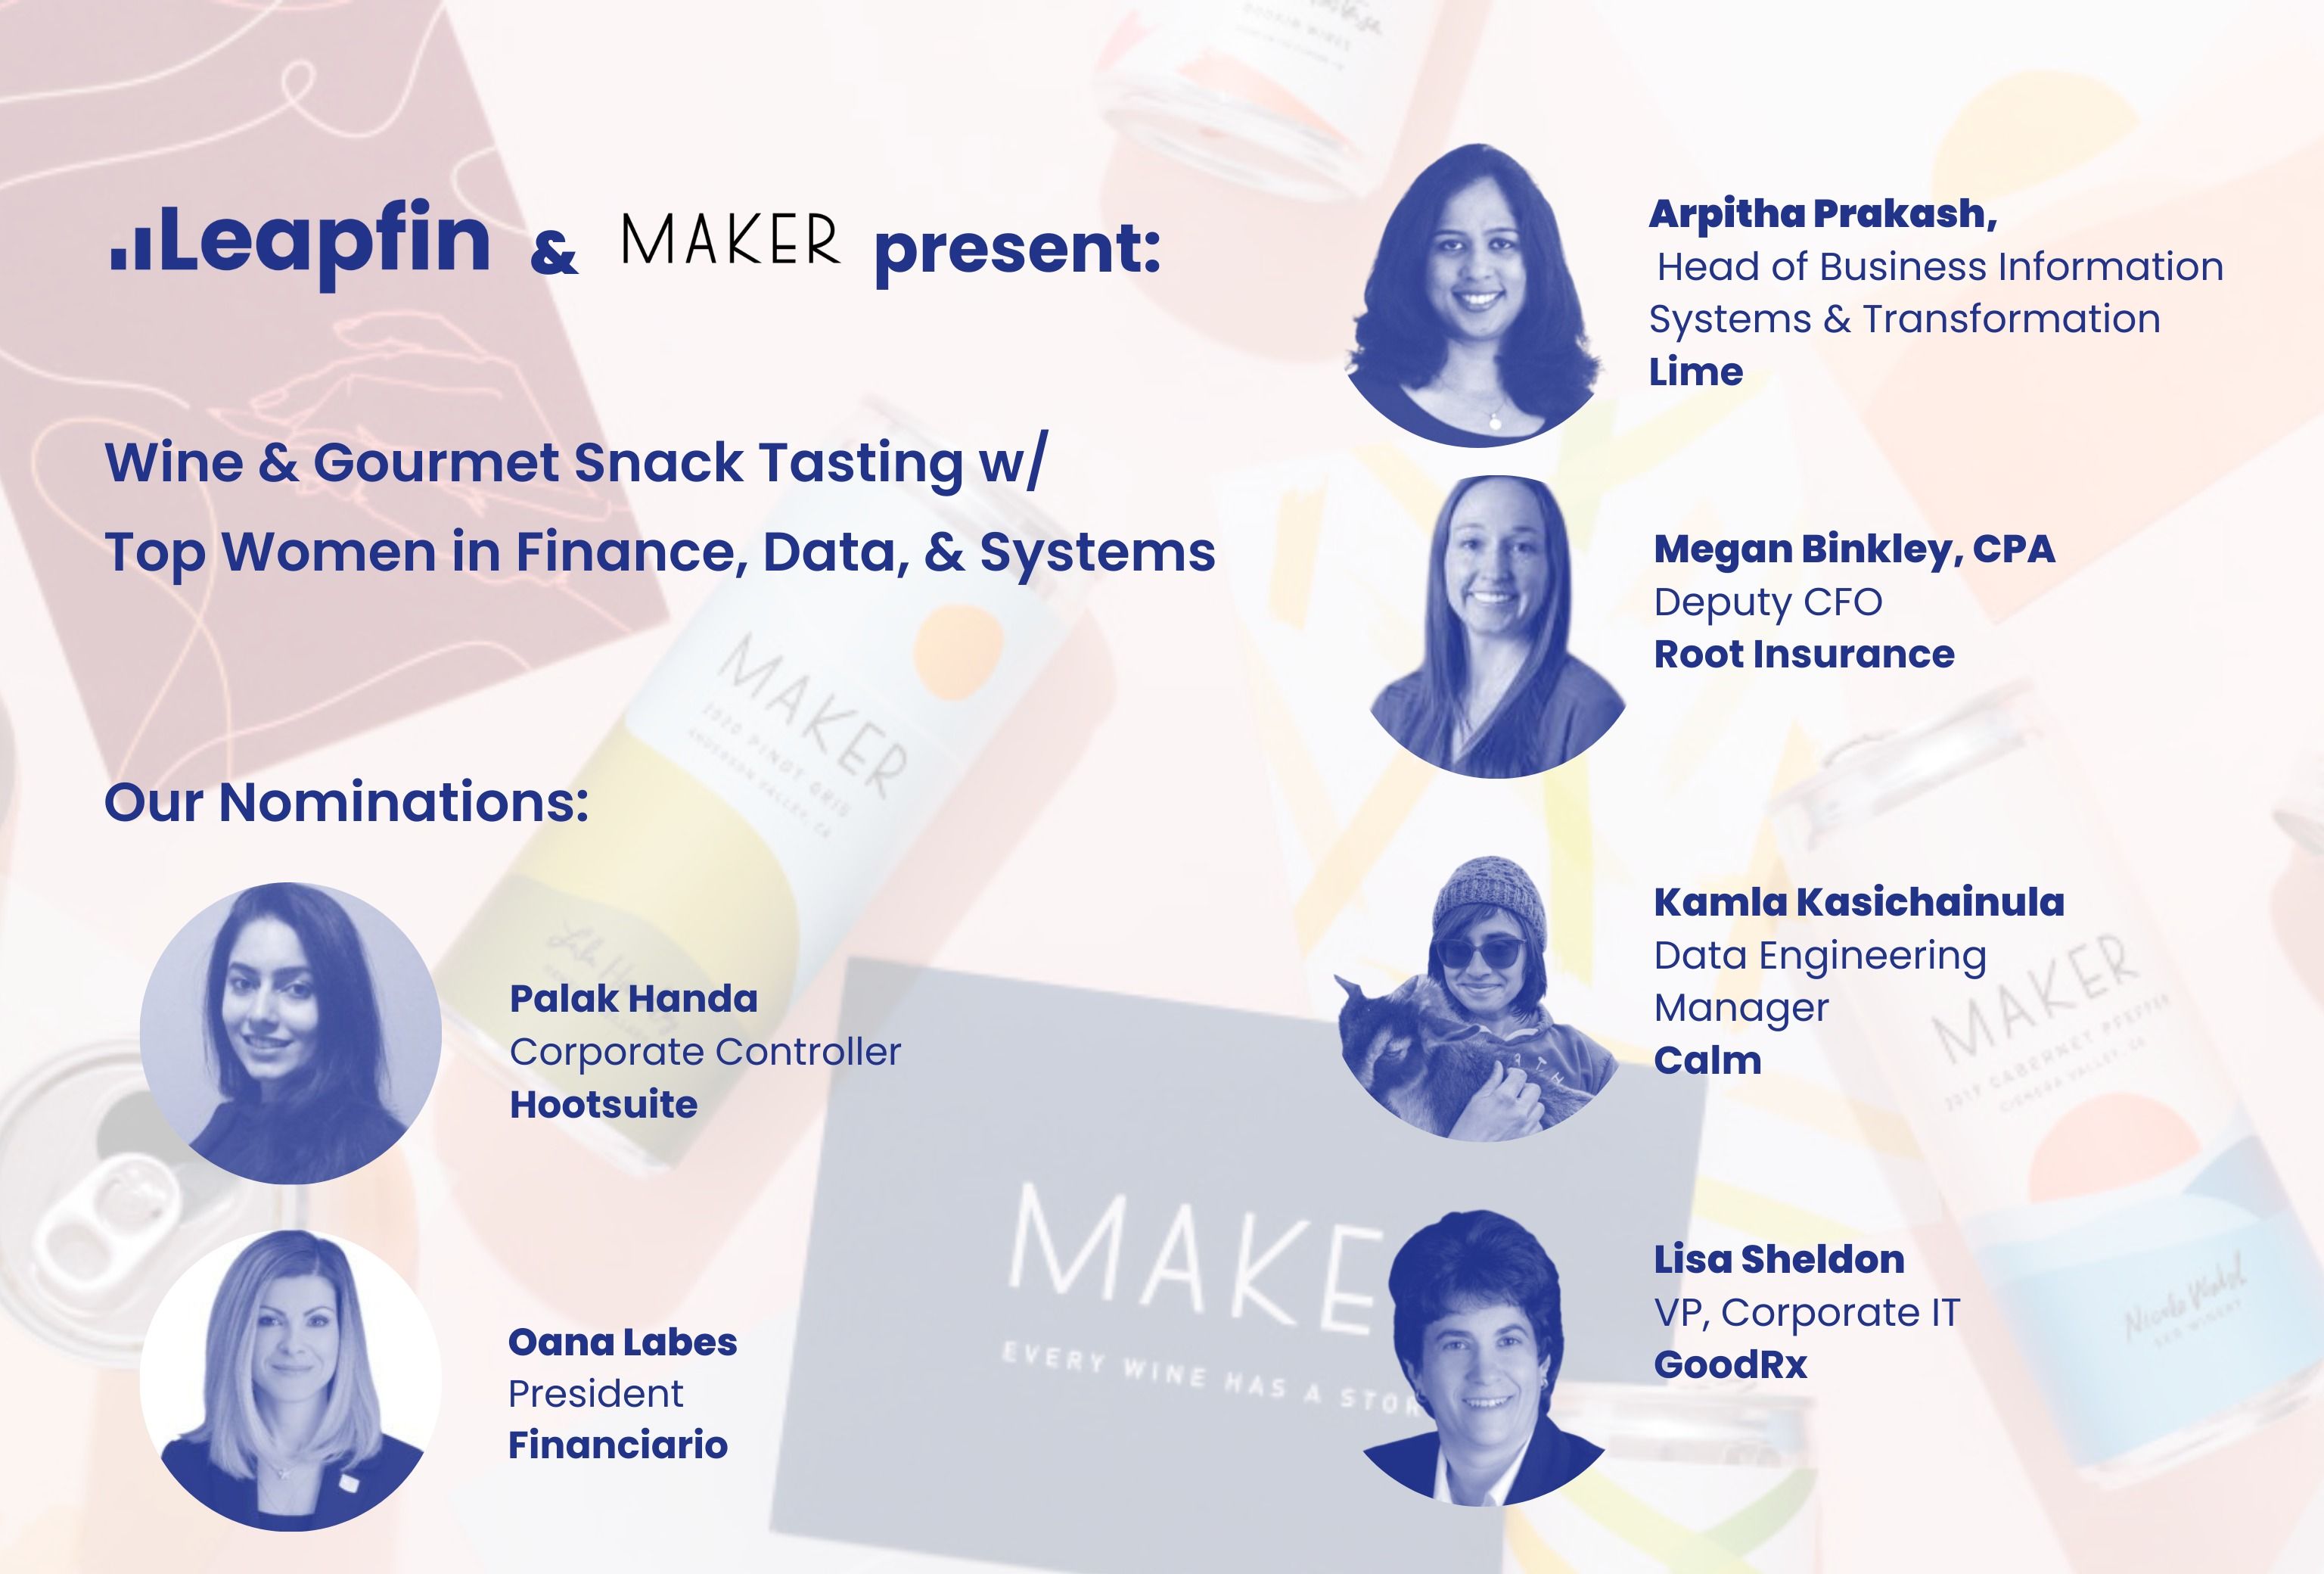 Lessons from the top women in finance, data, & systems